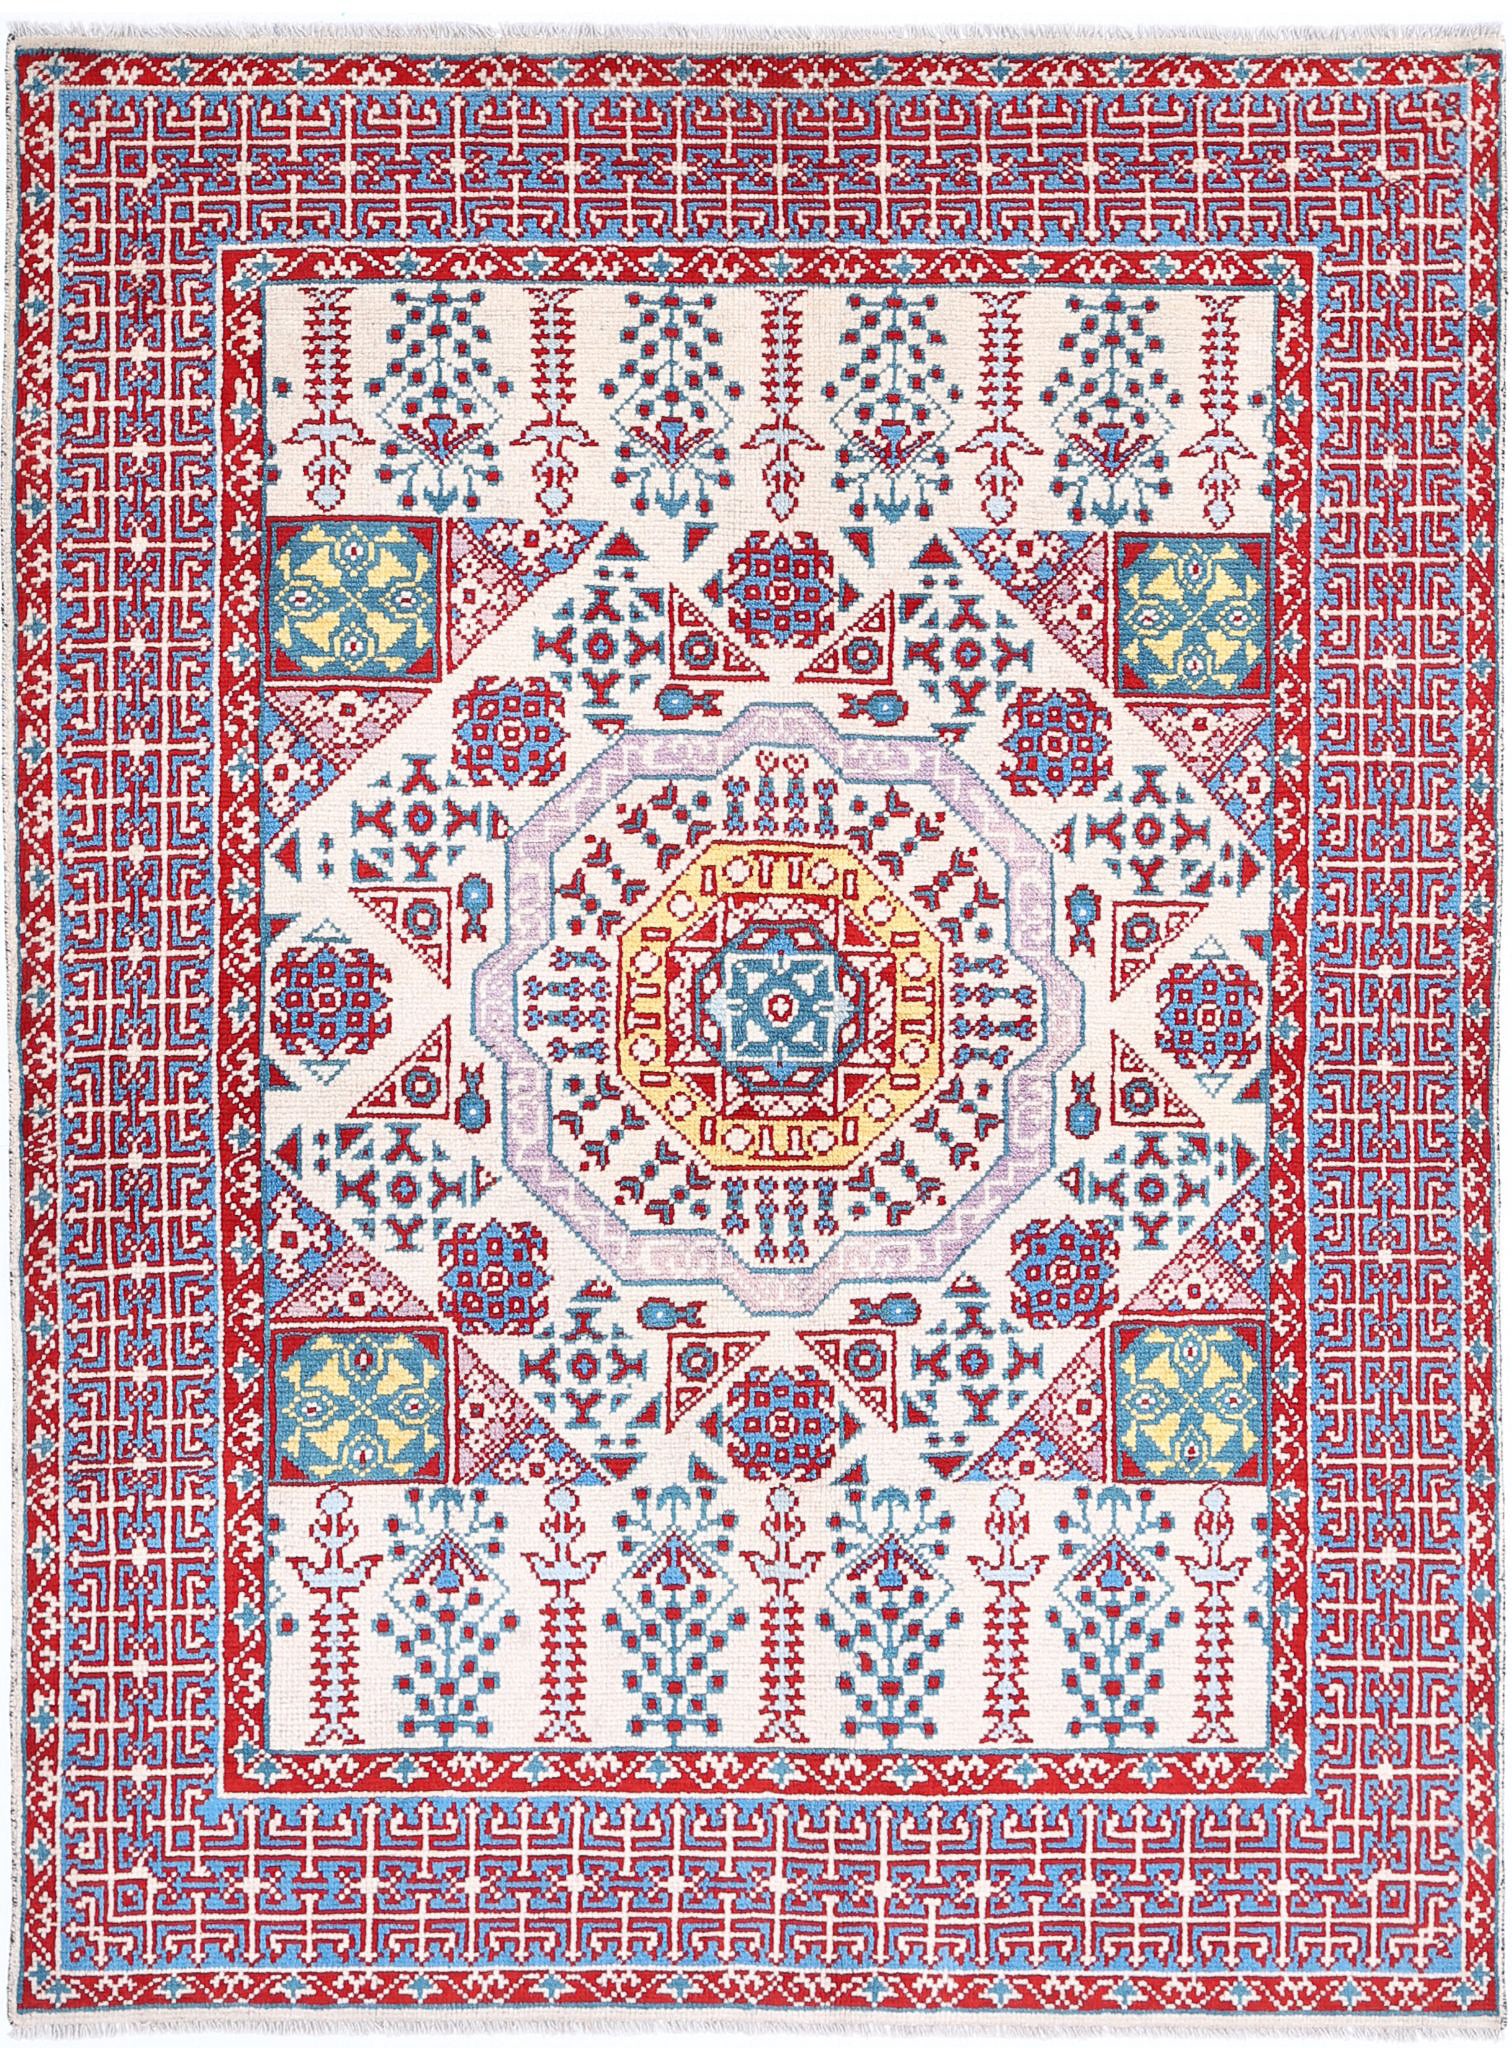 Revival-hand-knotted-qarghani-wool-rug-5014096.jpg